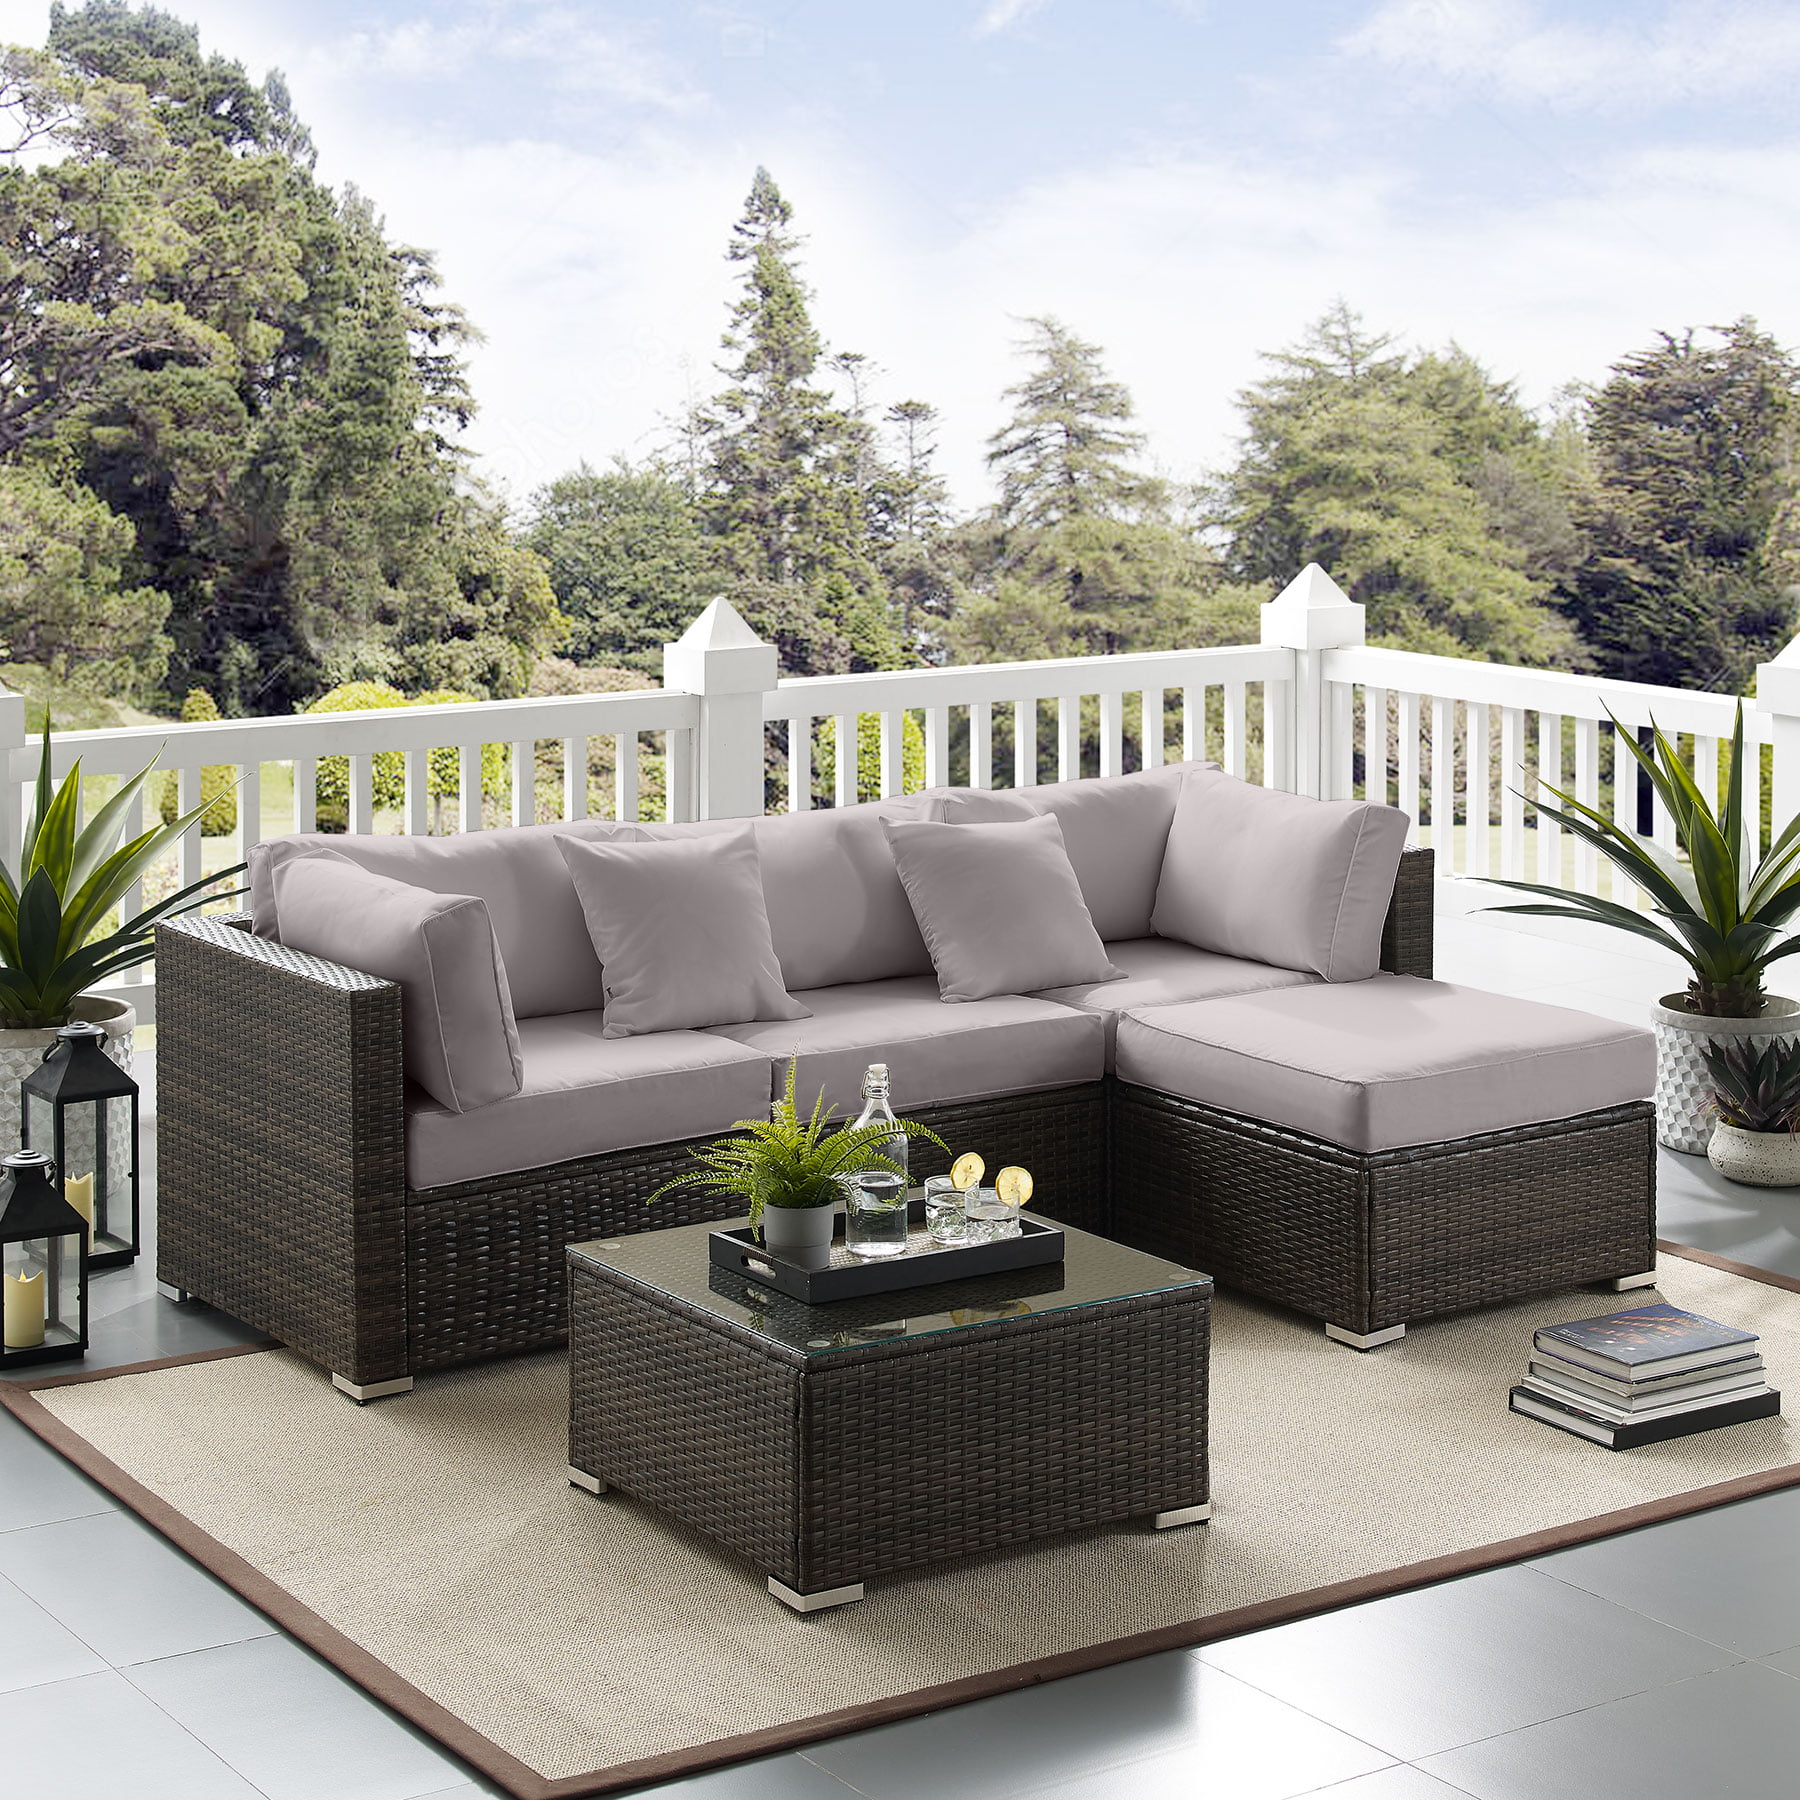 Tribesigns 5 PCS Outdoor Furniture Sectional Sofa Set